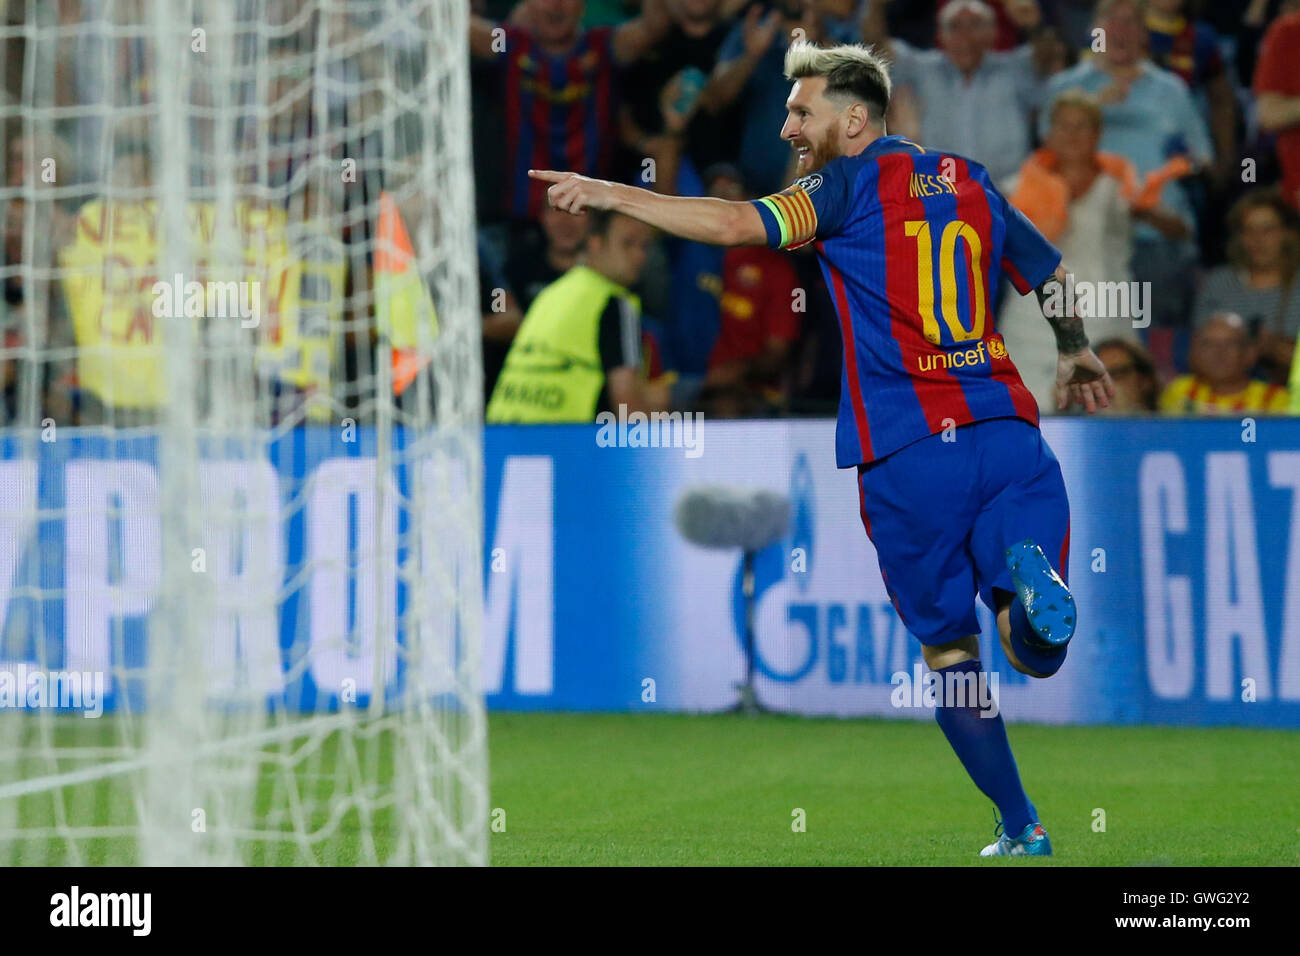 Barcelona. 13th Sep, 2016. Barcelona's Lionel Messi celebrates scoring  during the UEFA Champions League Group C match between Barcelona and Celtic  in Barcelona, Sept. 13, 2016. Barcelona won 7-0. Credit: Pau  Barrena/Xinhua/Alamy